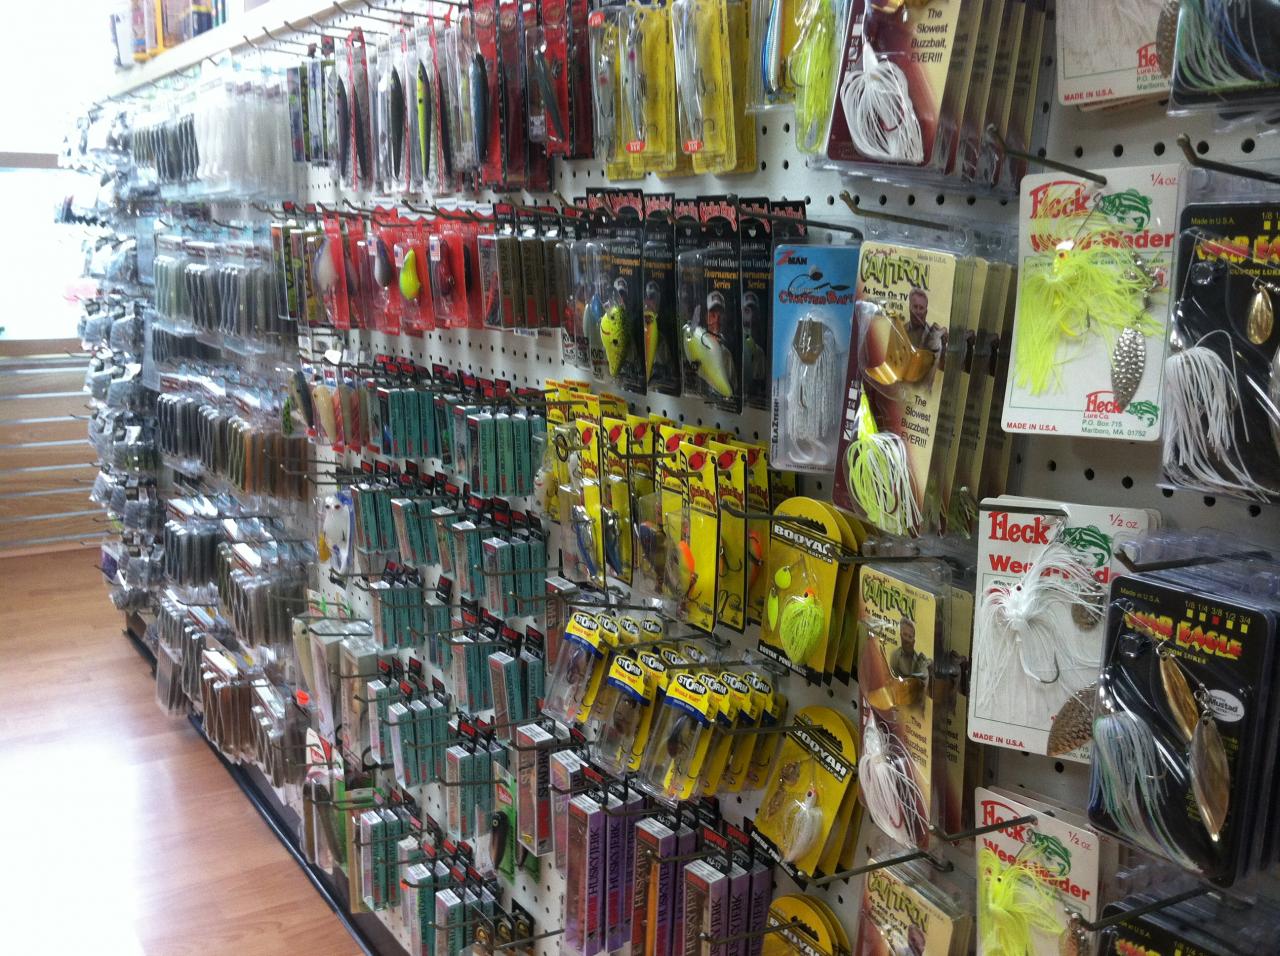 Candlewood Bait & Tackle: Buy Your Bait, Tackle & Gear Here in